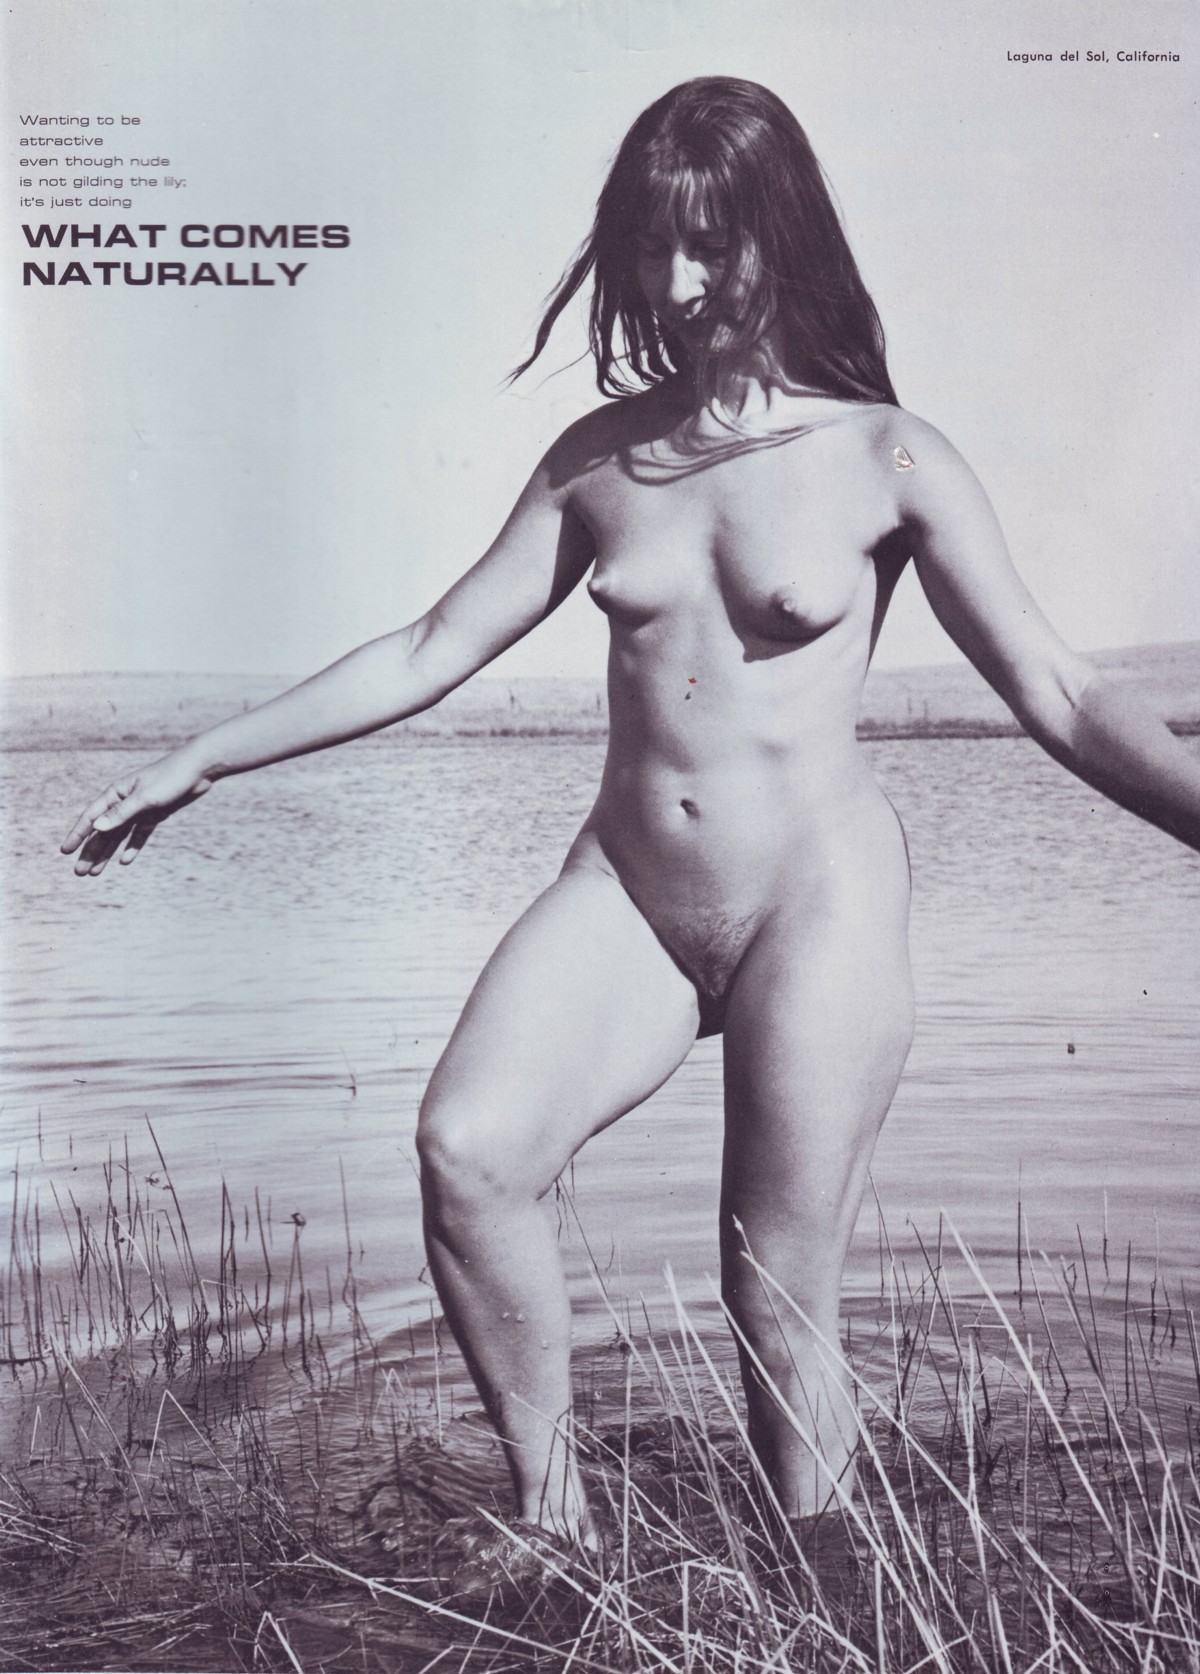 Search results for "Vintage Polaroid nudism Family girls b&w Outdo...